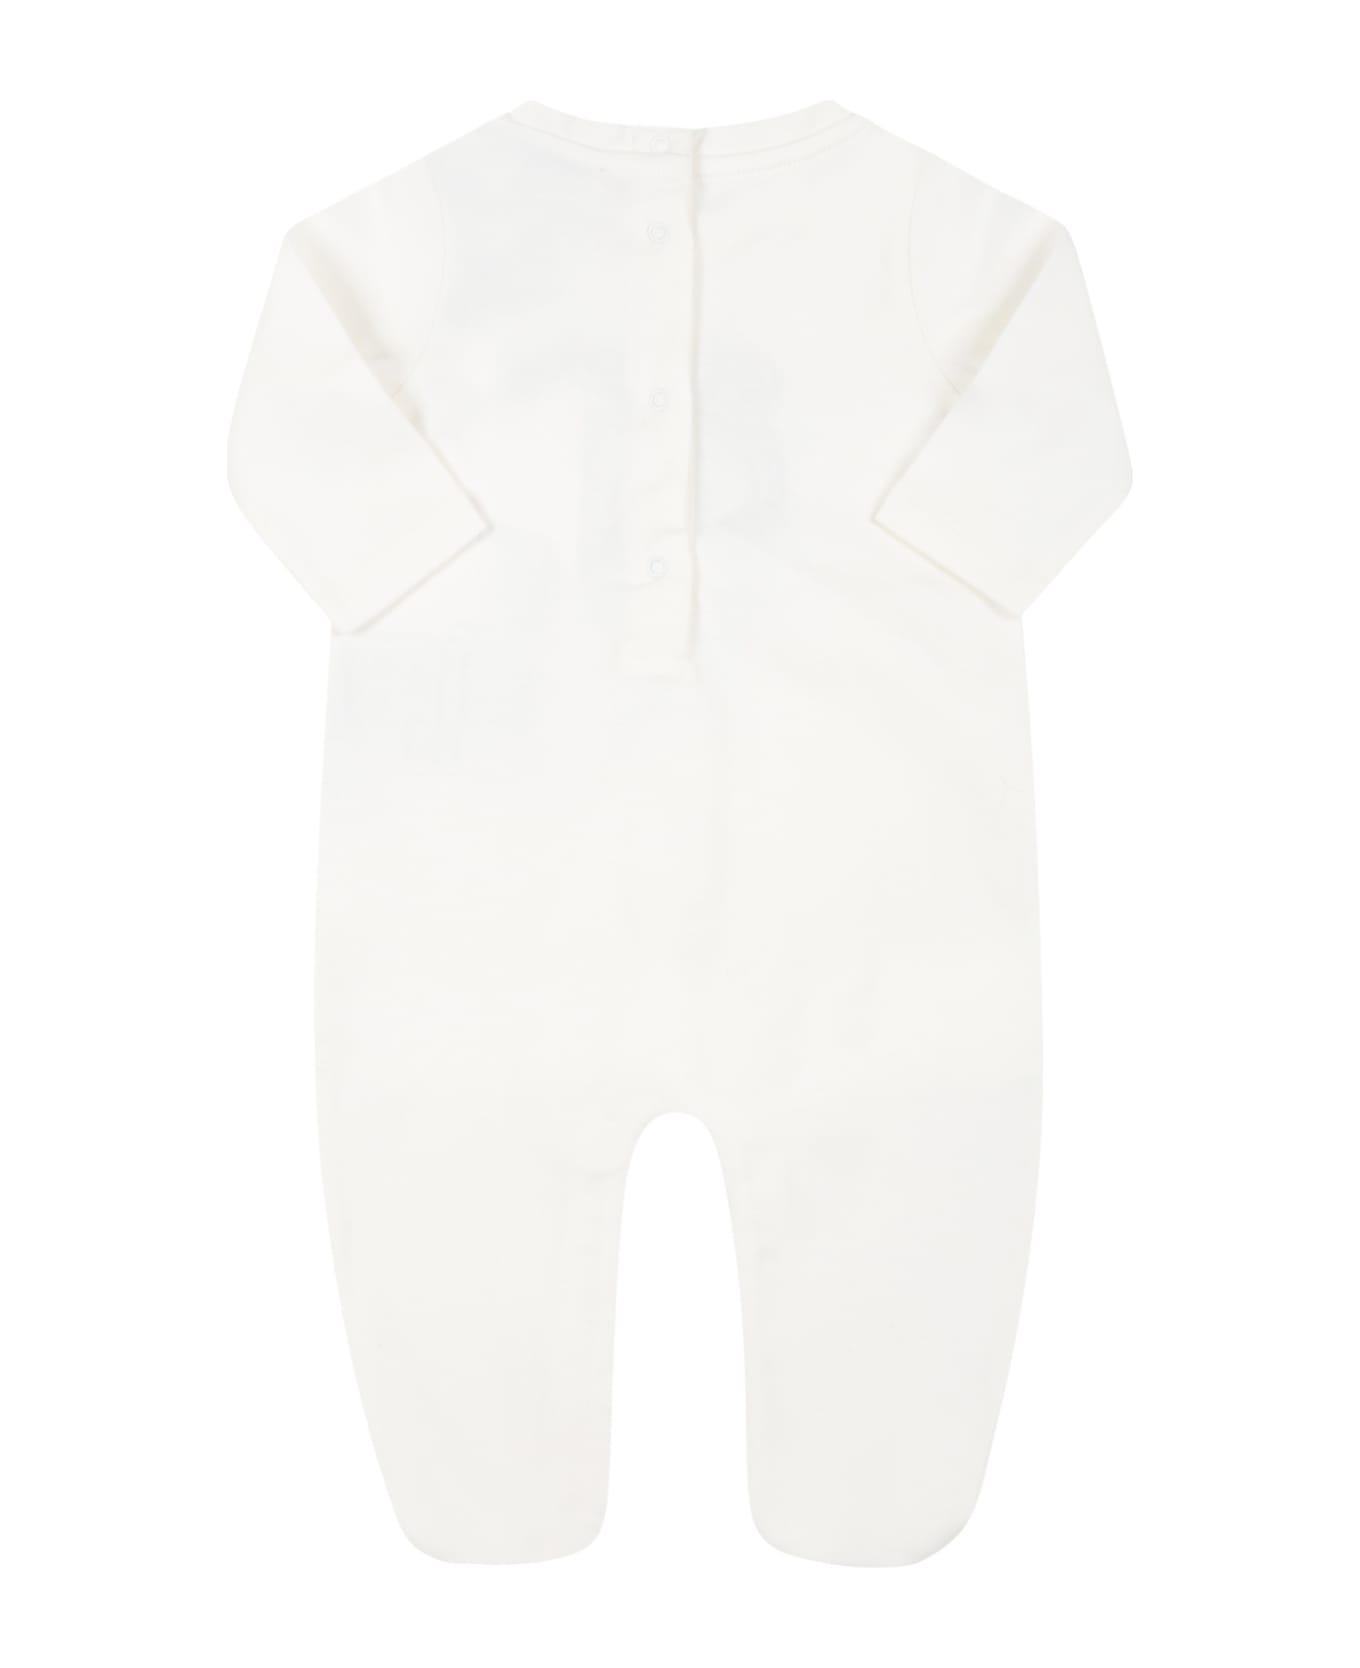 Moncler White Babygrow For Baby Kids With Bear